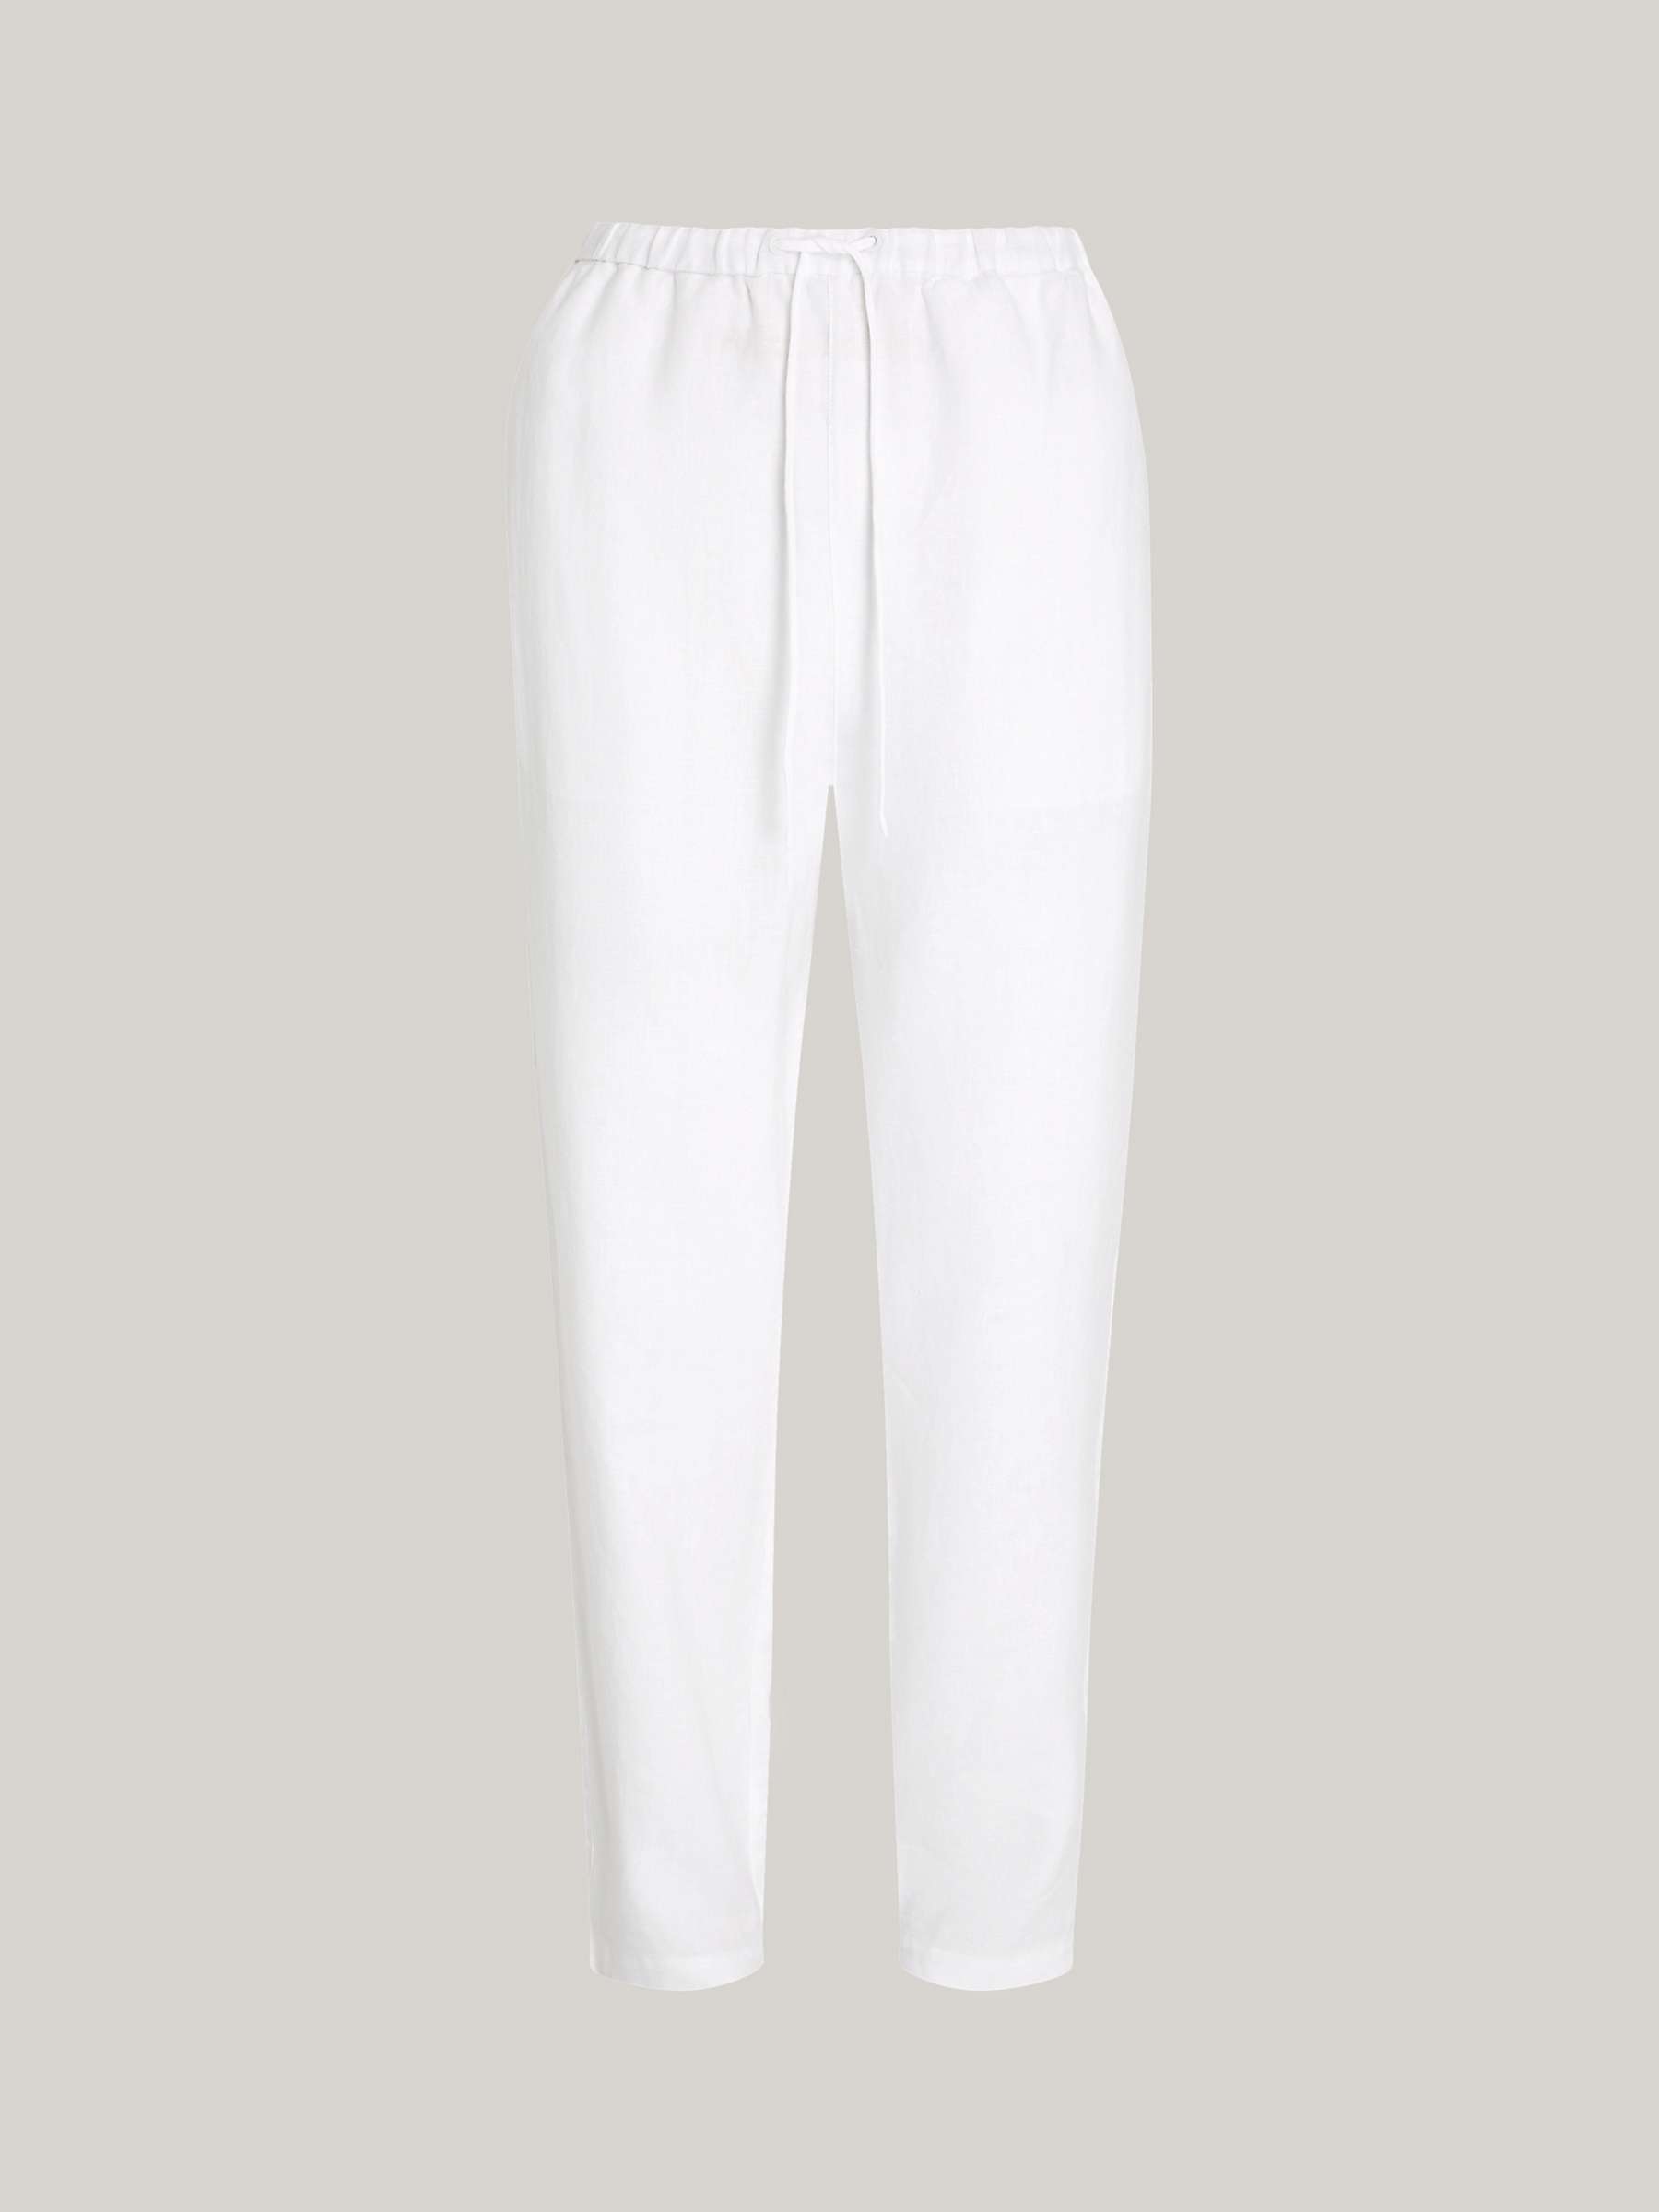 Buy Tommy Hilfiger Linen Blend Drawstring Trousers, Optic White Online at johnlewis.com